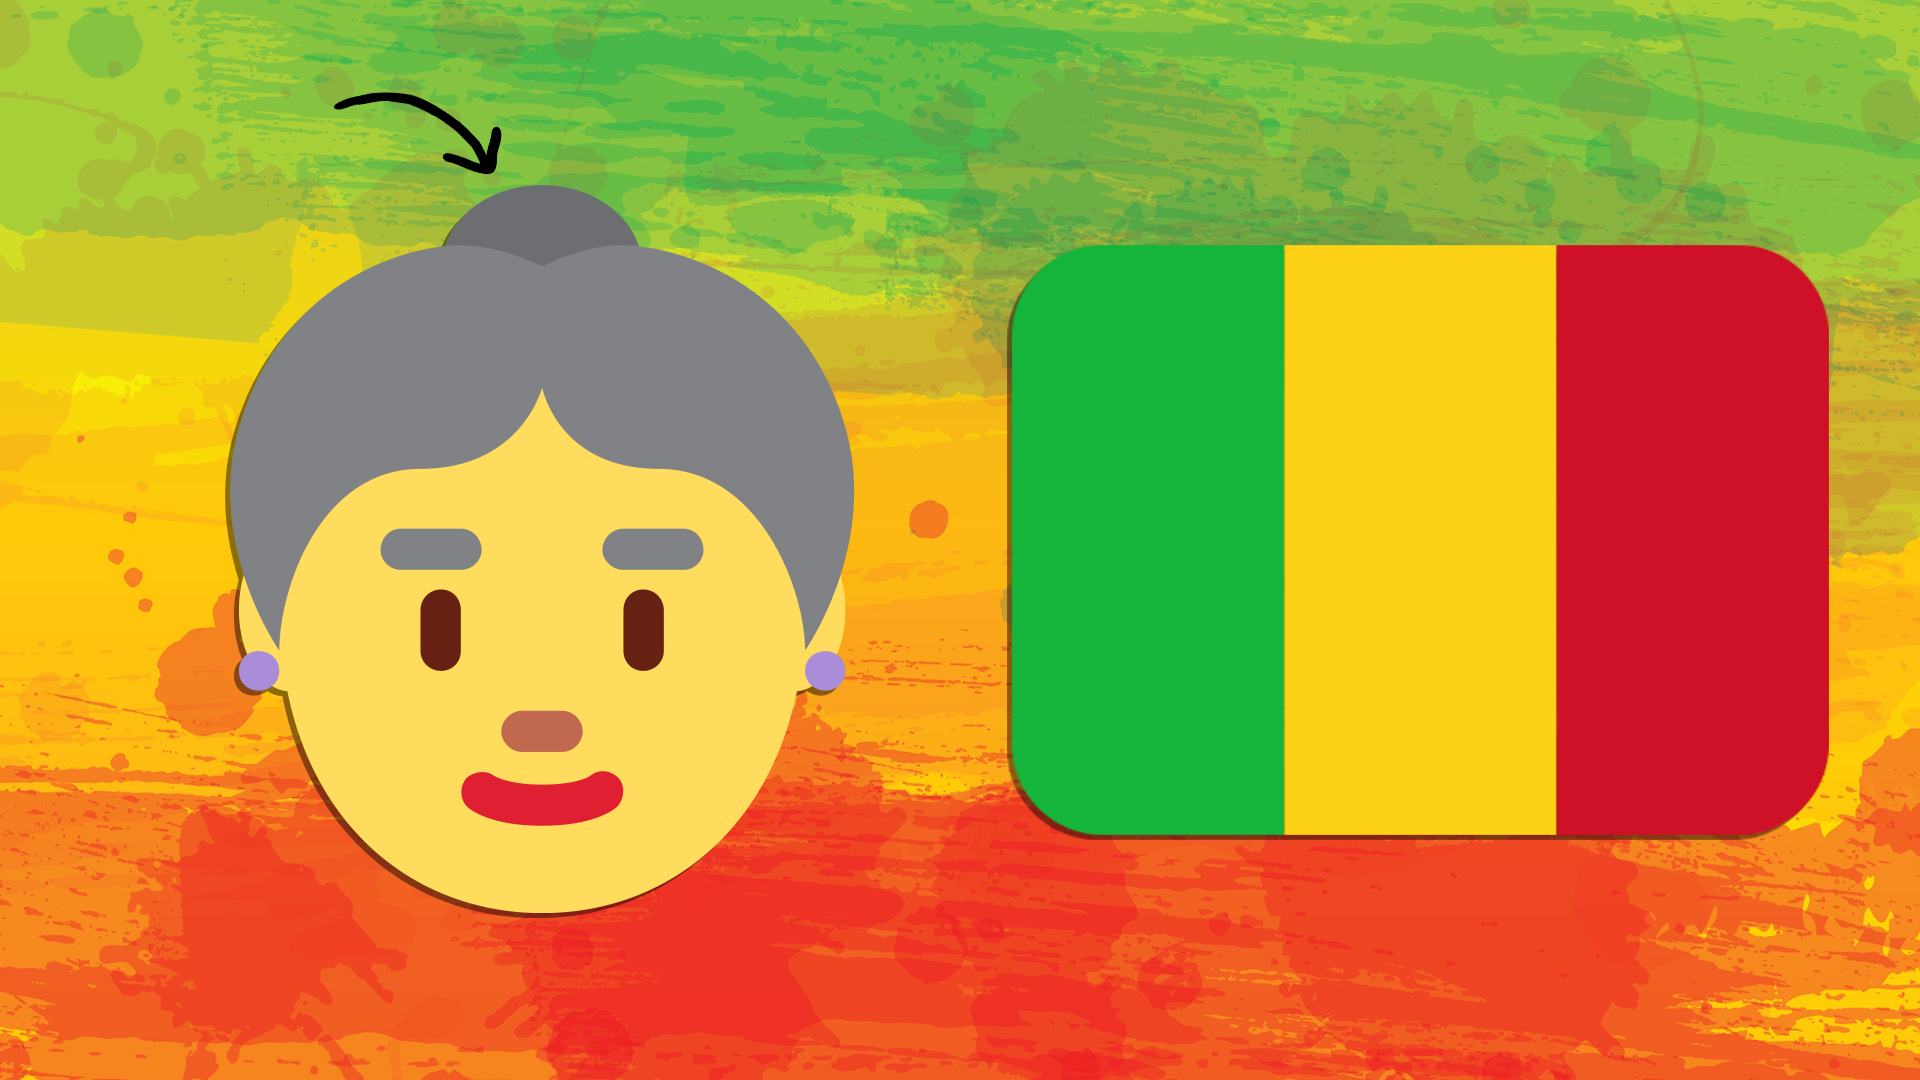 A hairstyle emoji and a flag